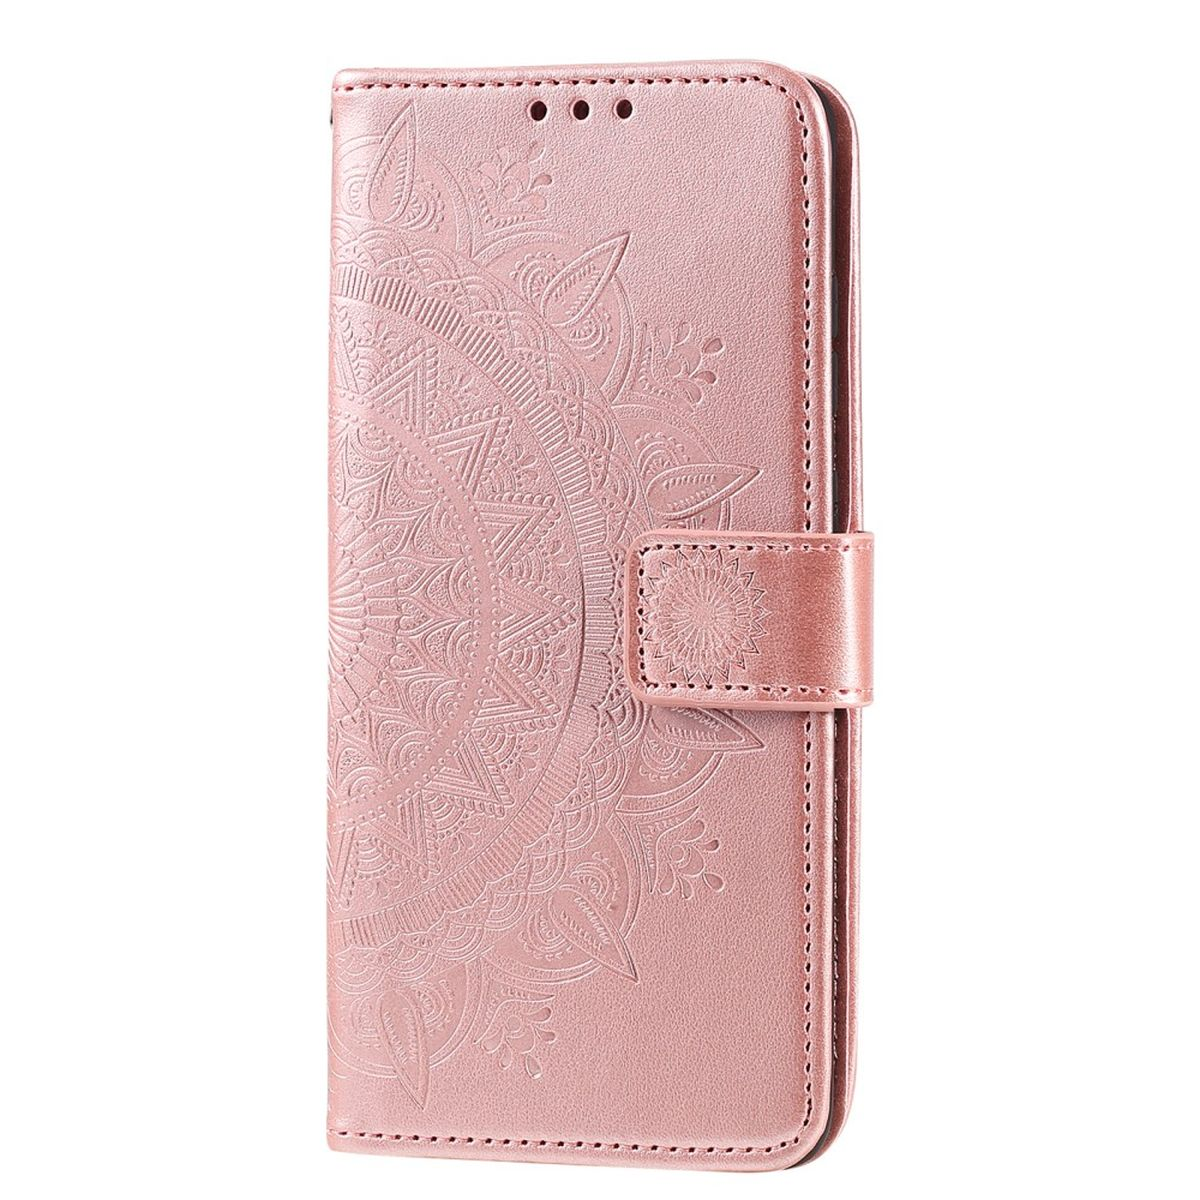 Klapphülle Mandala A33 Muster, Bookcover, Rosegold 5G, mit Galaxy Samsung, COVERKINGZ